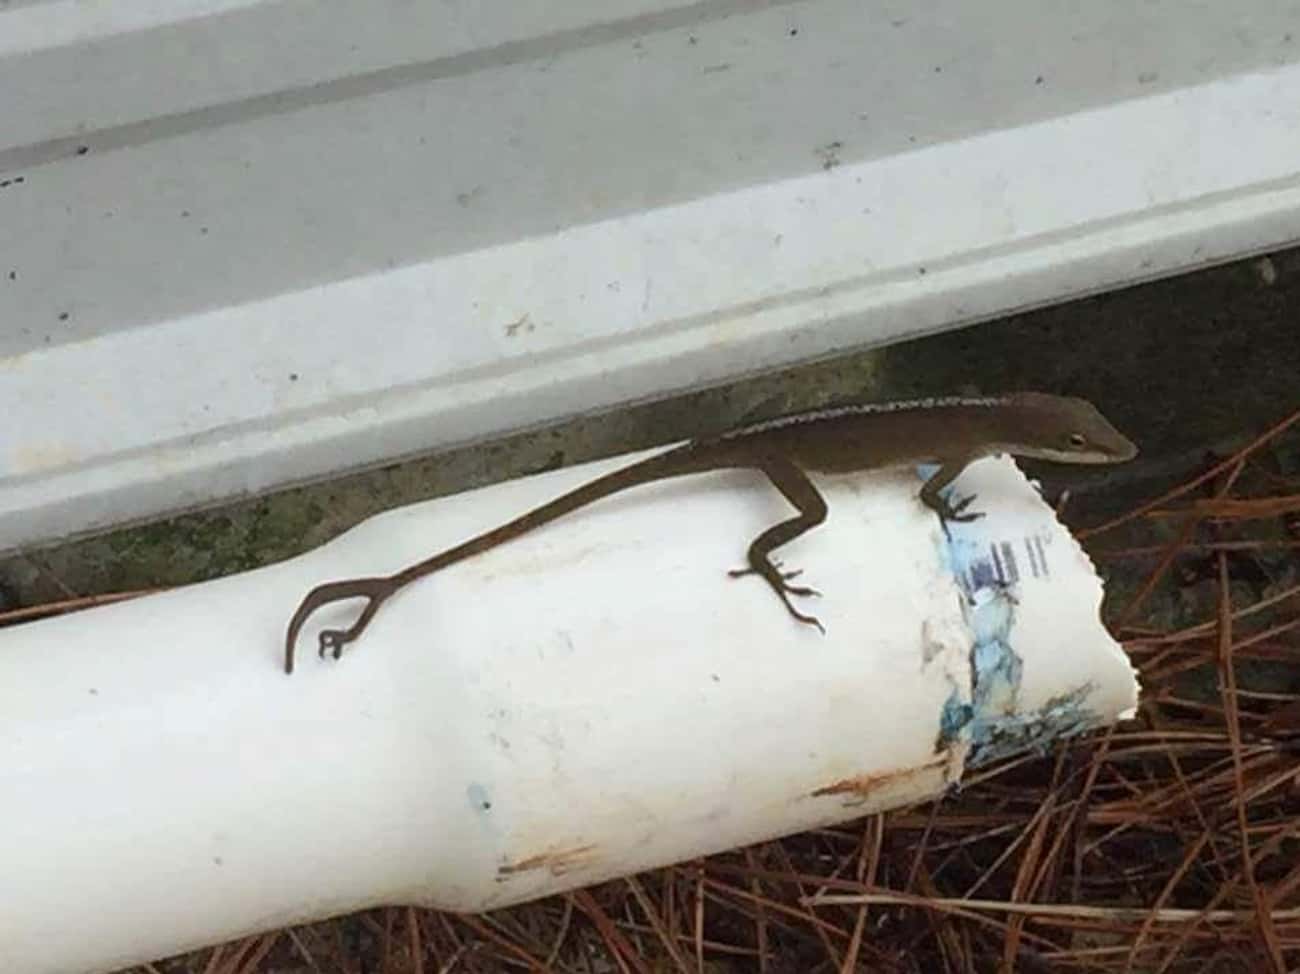 This Lizard Appears To Have An Extra Foot On Its Tail